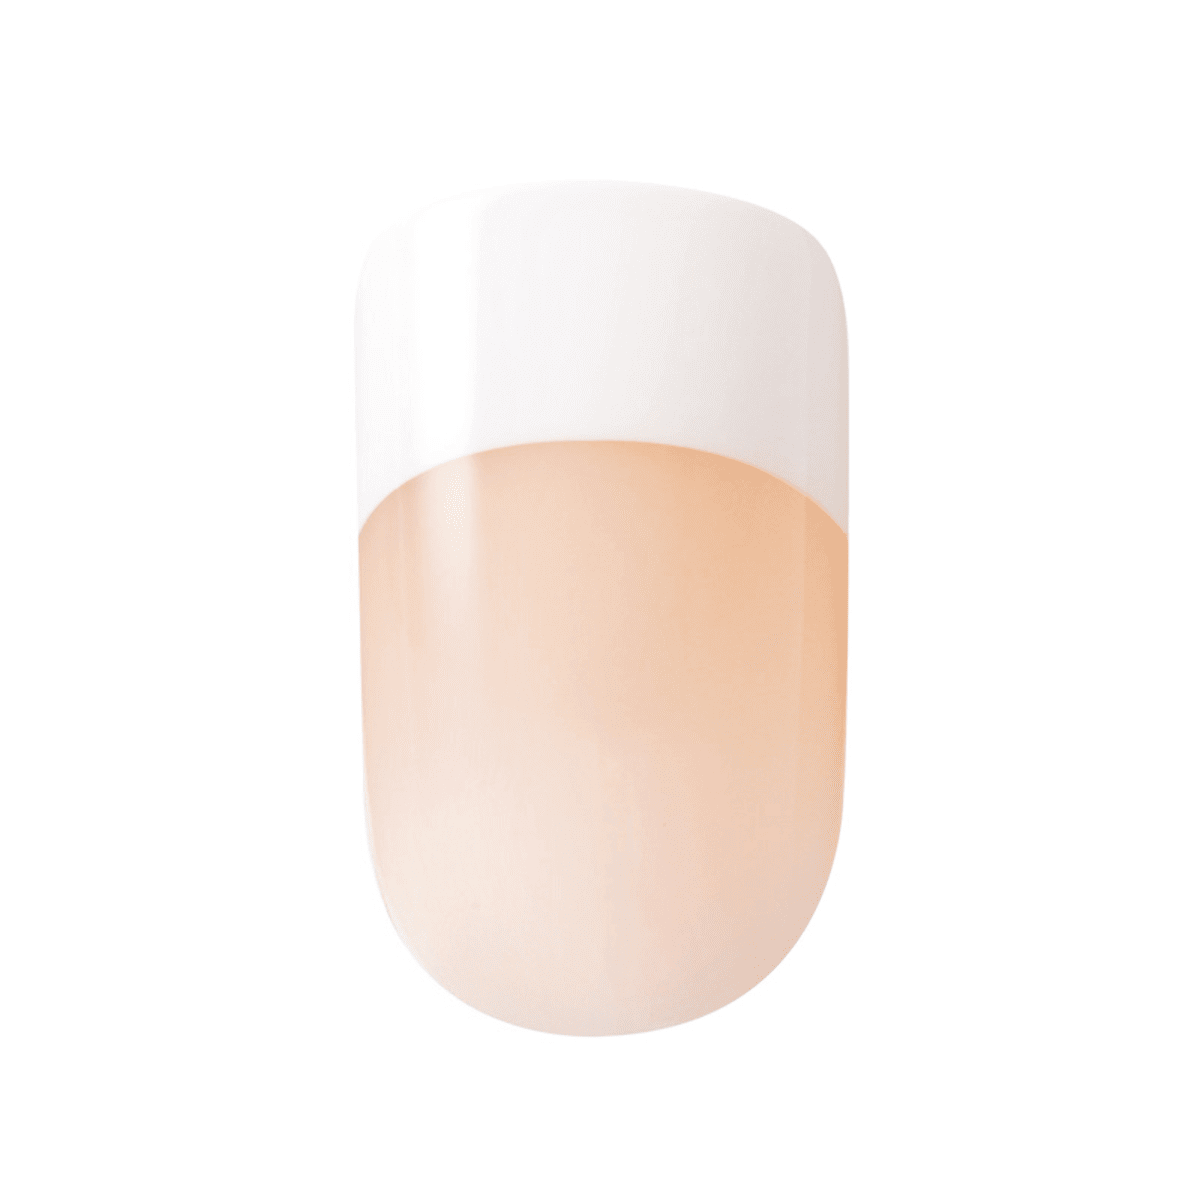 KISS Salon Acrylic, Press-On Nails, Rumour Mill, White, Med Squoval, 28ct